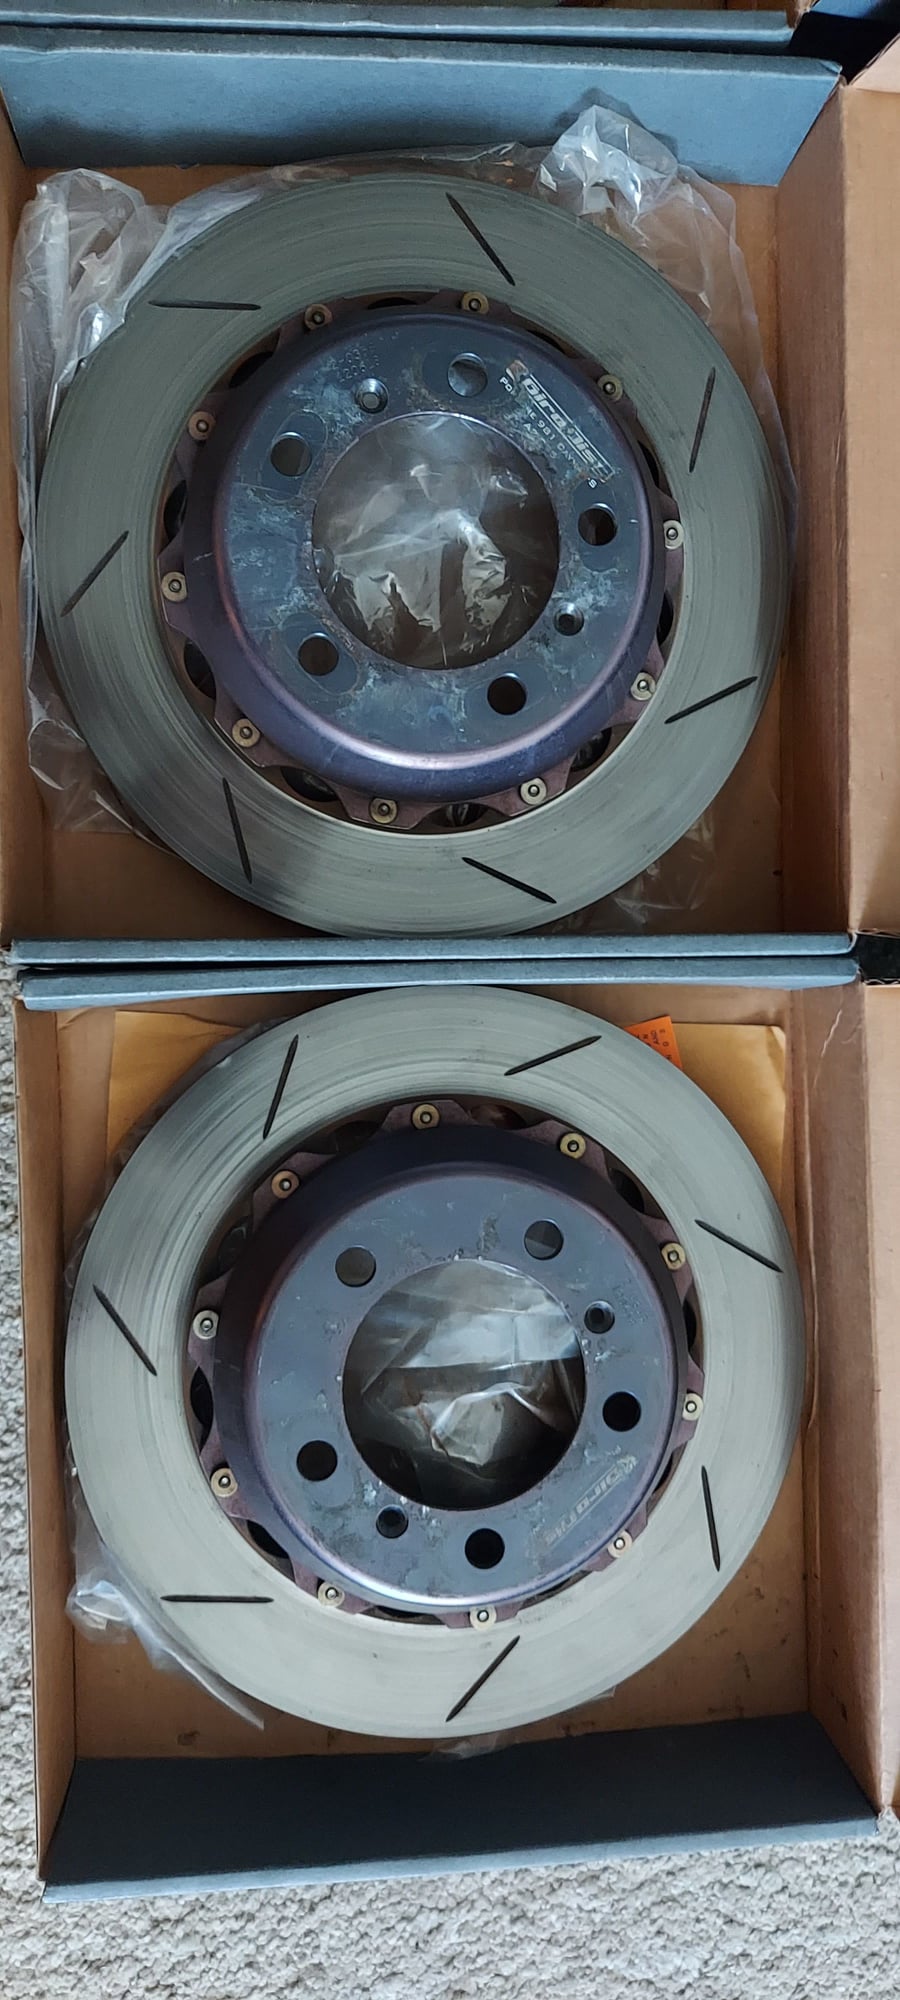 Brakes - FS: 981 S - Girodiscs (Front and Rear) (local pick up) - Used - 2014 to 2016 Porsche Cayman - Los Angeles, CA 90045, United States